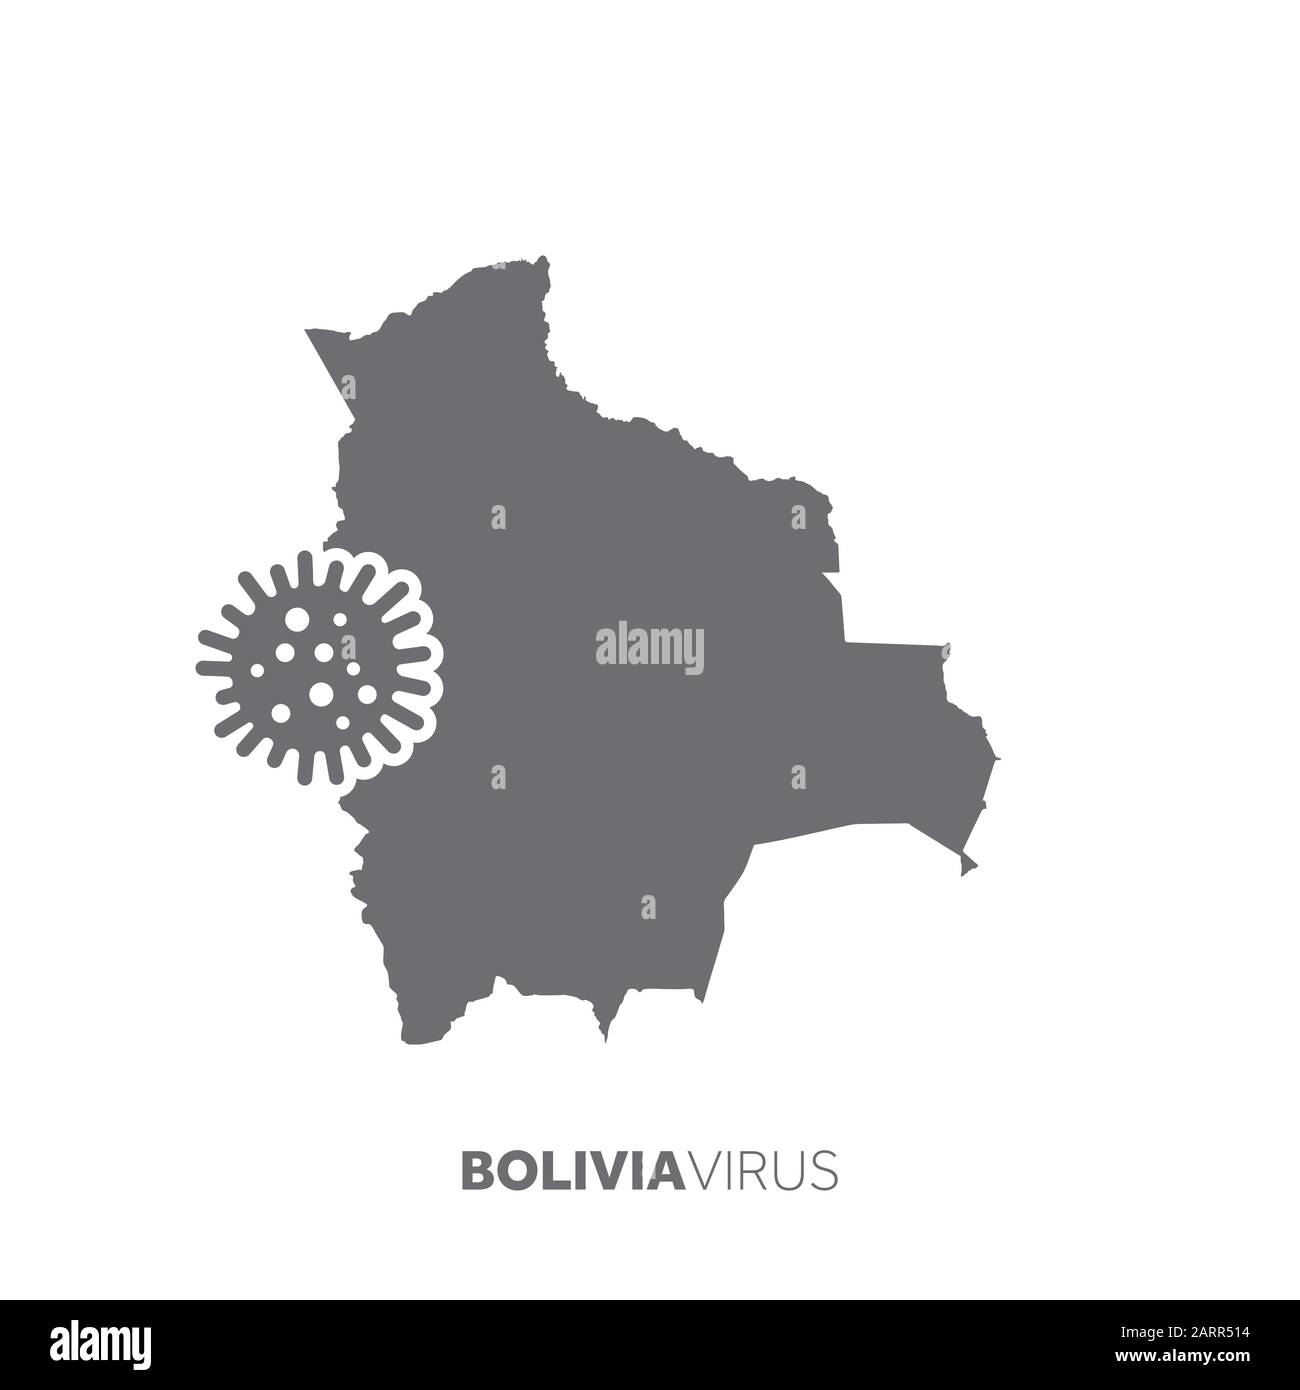 Bolivia map with a virus microbe. Illness and disease outbreak Stock Vector